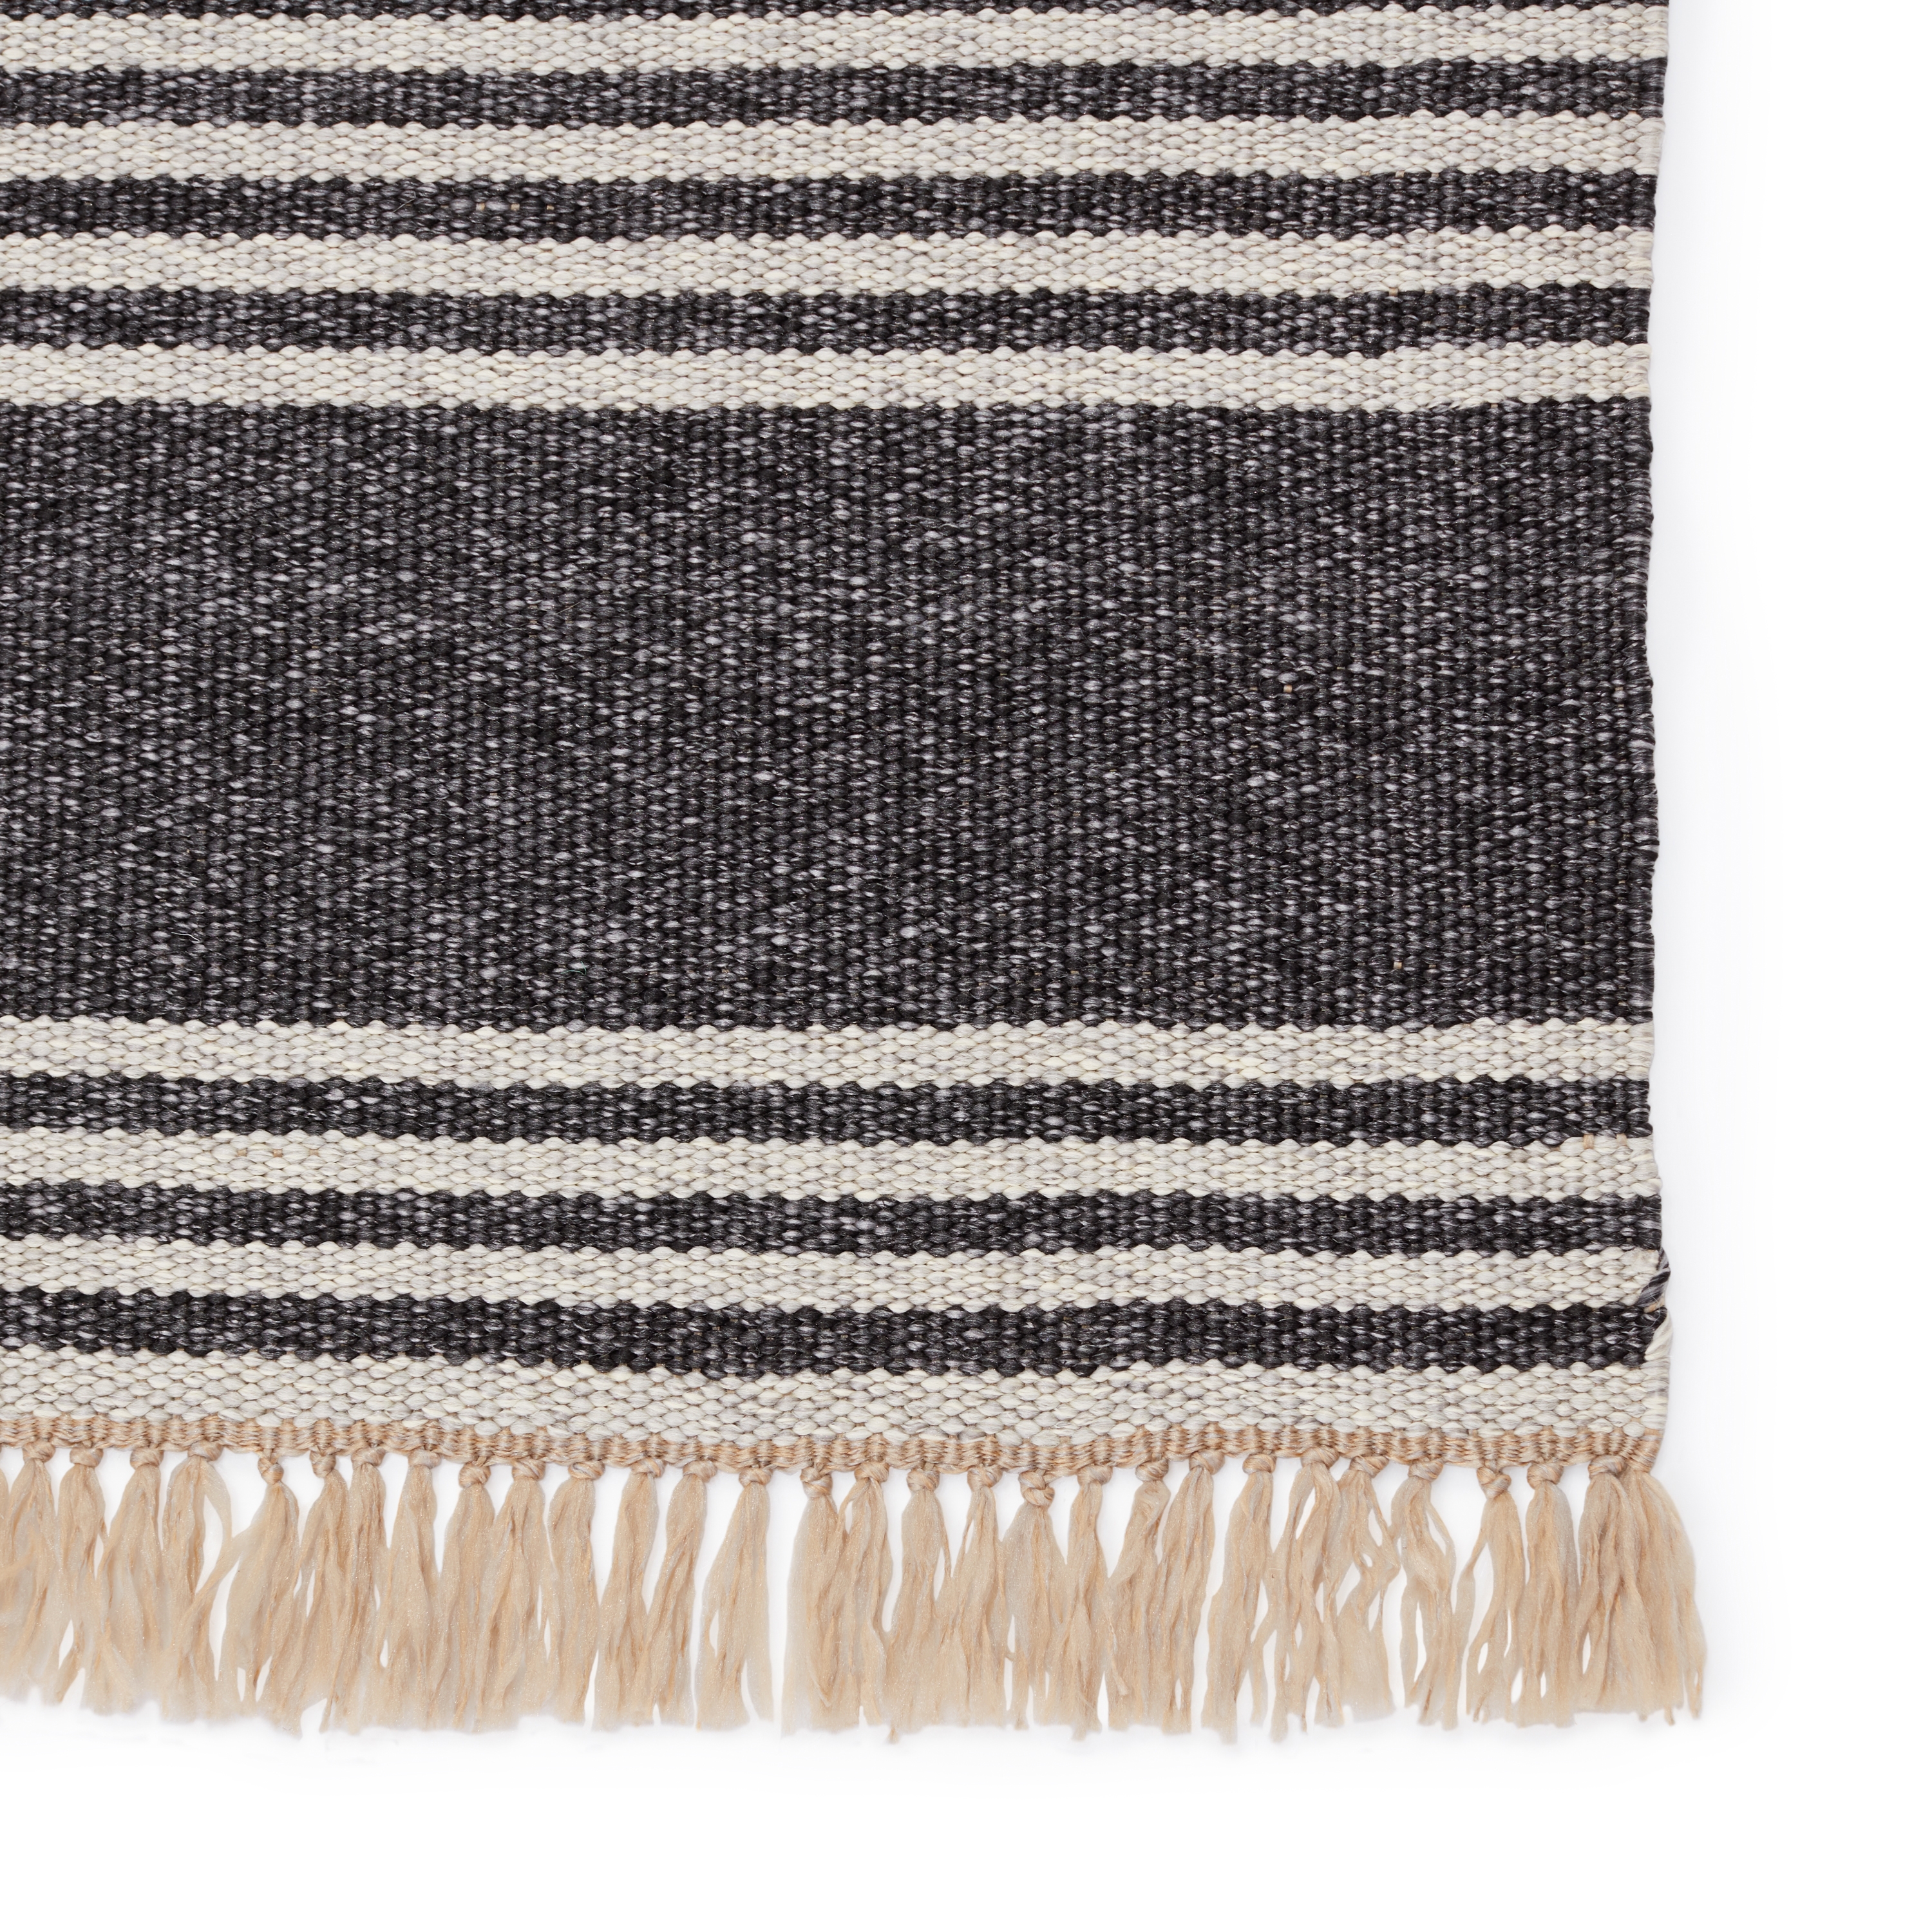 Vibe by Strand Indoor/ Outdoor Striped Dark Gray/ Beige Area Rug (2'X3') - Image 3